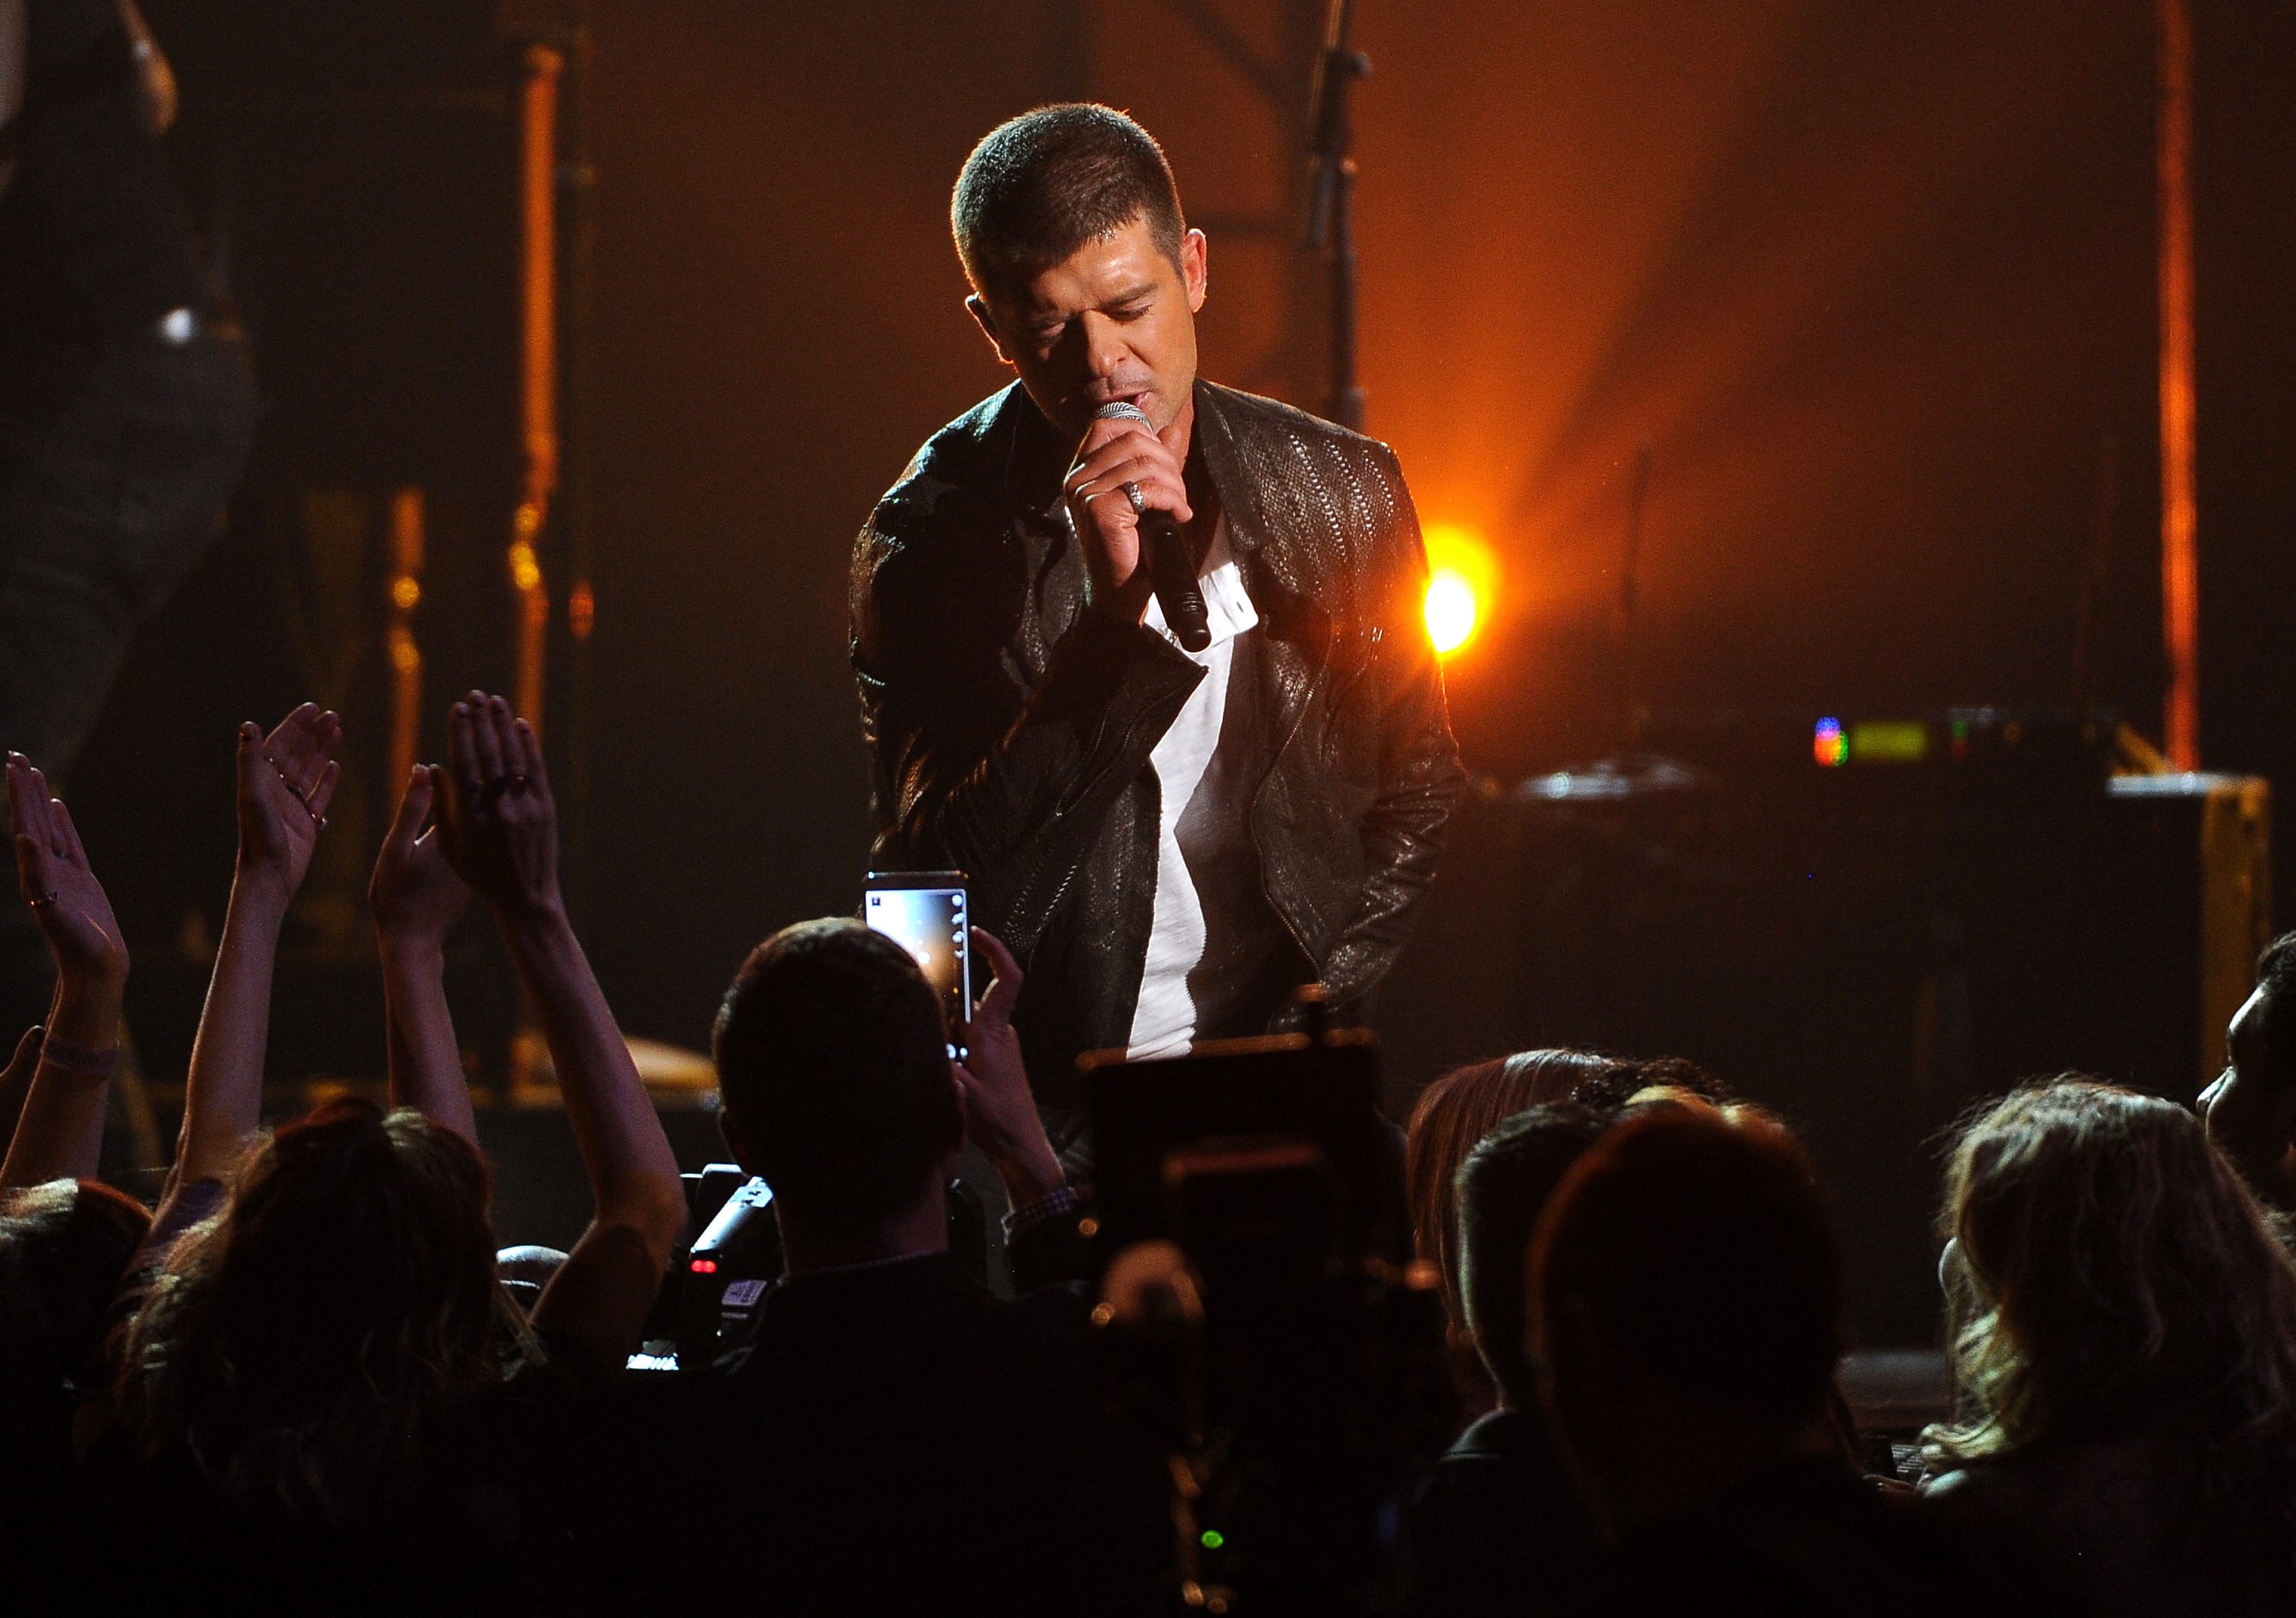 Robin Thicke performs on stage at the Billboard Music Awards at the MGM Grand Garden Arena on Sunday, May 18, 2014, in Las Vegas.